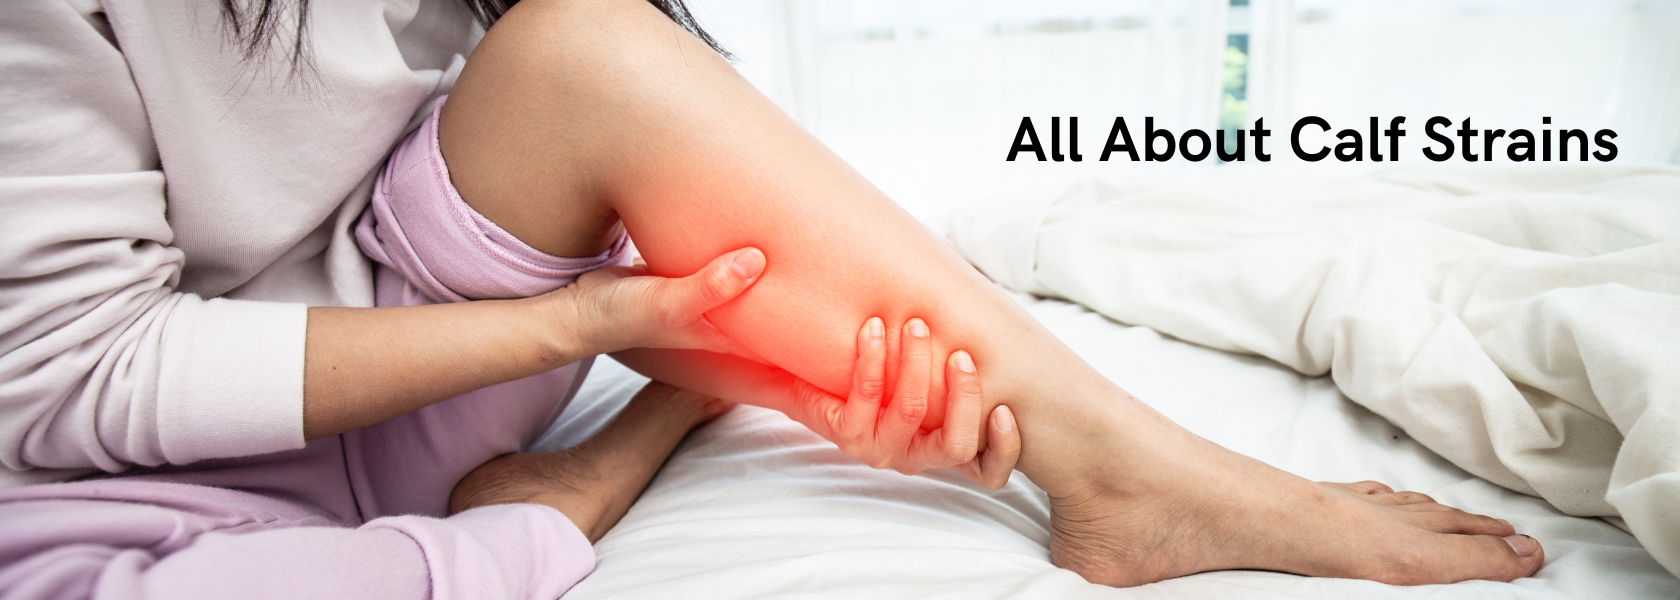 All About Calf Strains - Canberra Physiotherapy clinic - TM Physio Canberra